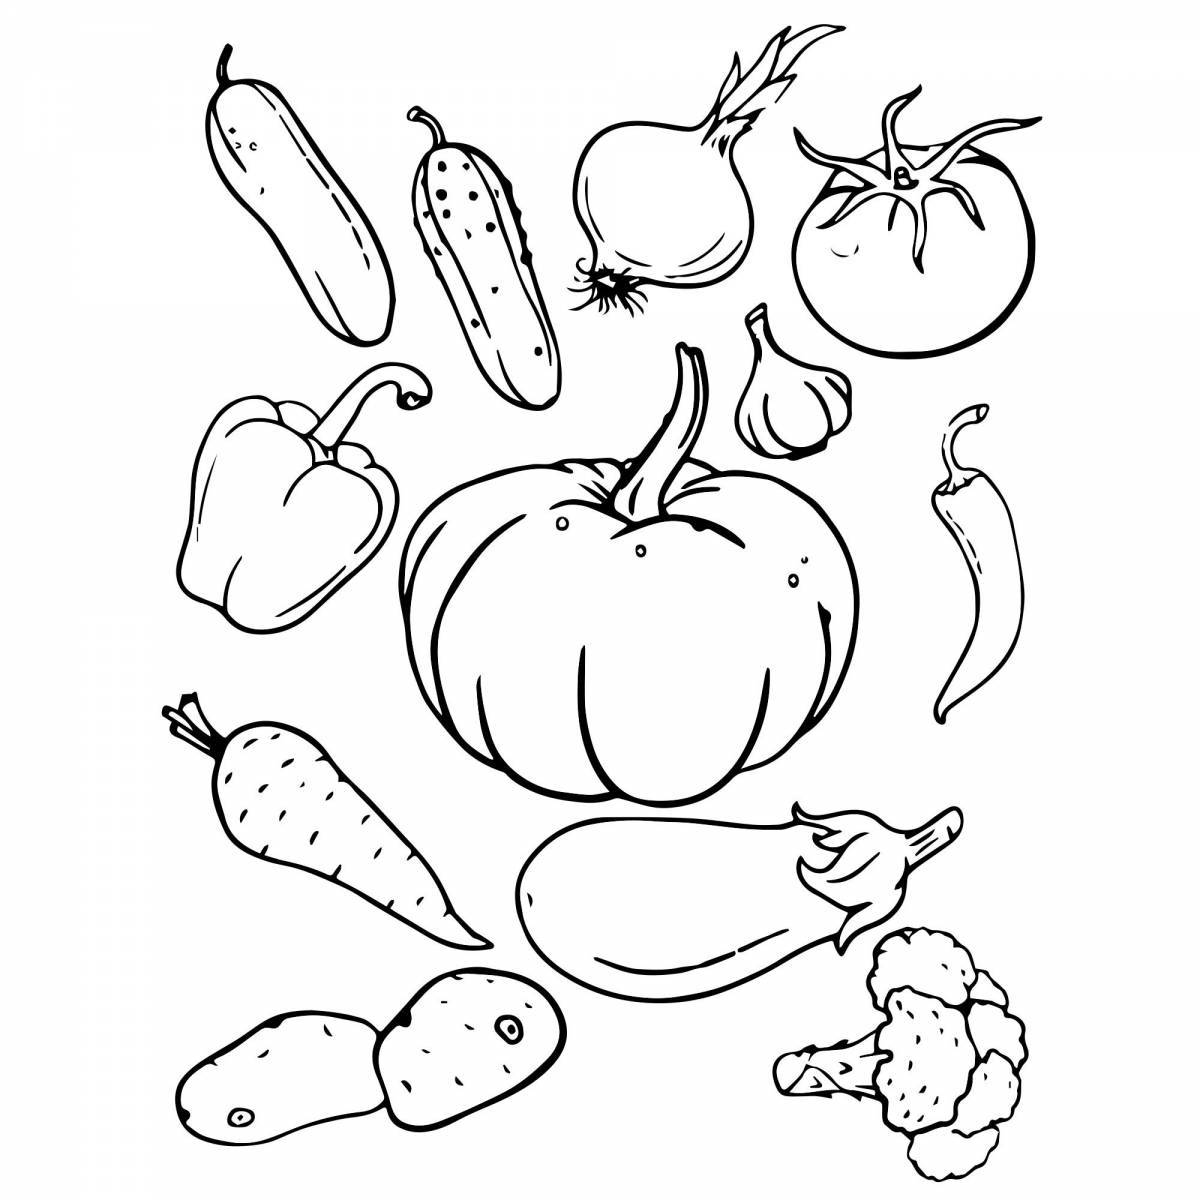 Impressive fruit and vegetable coloring pages for kids